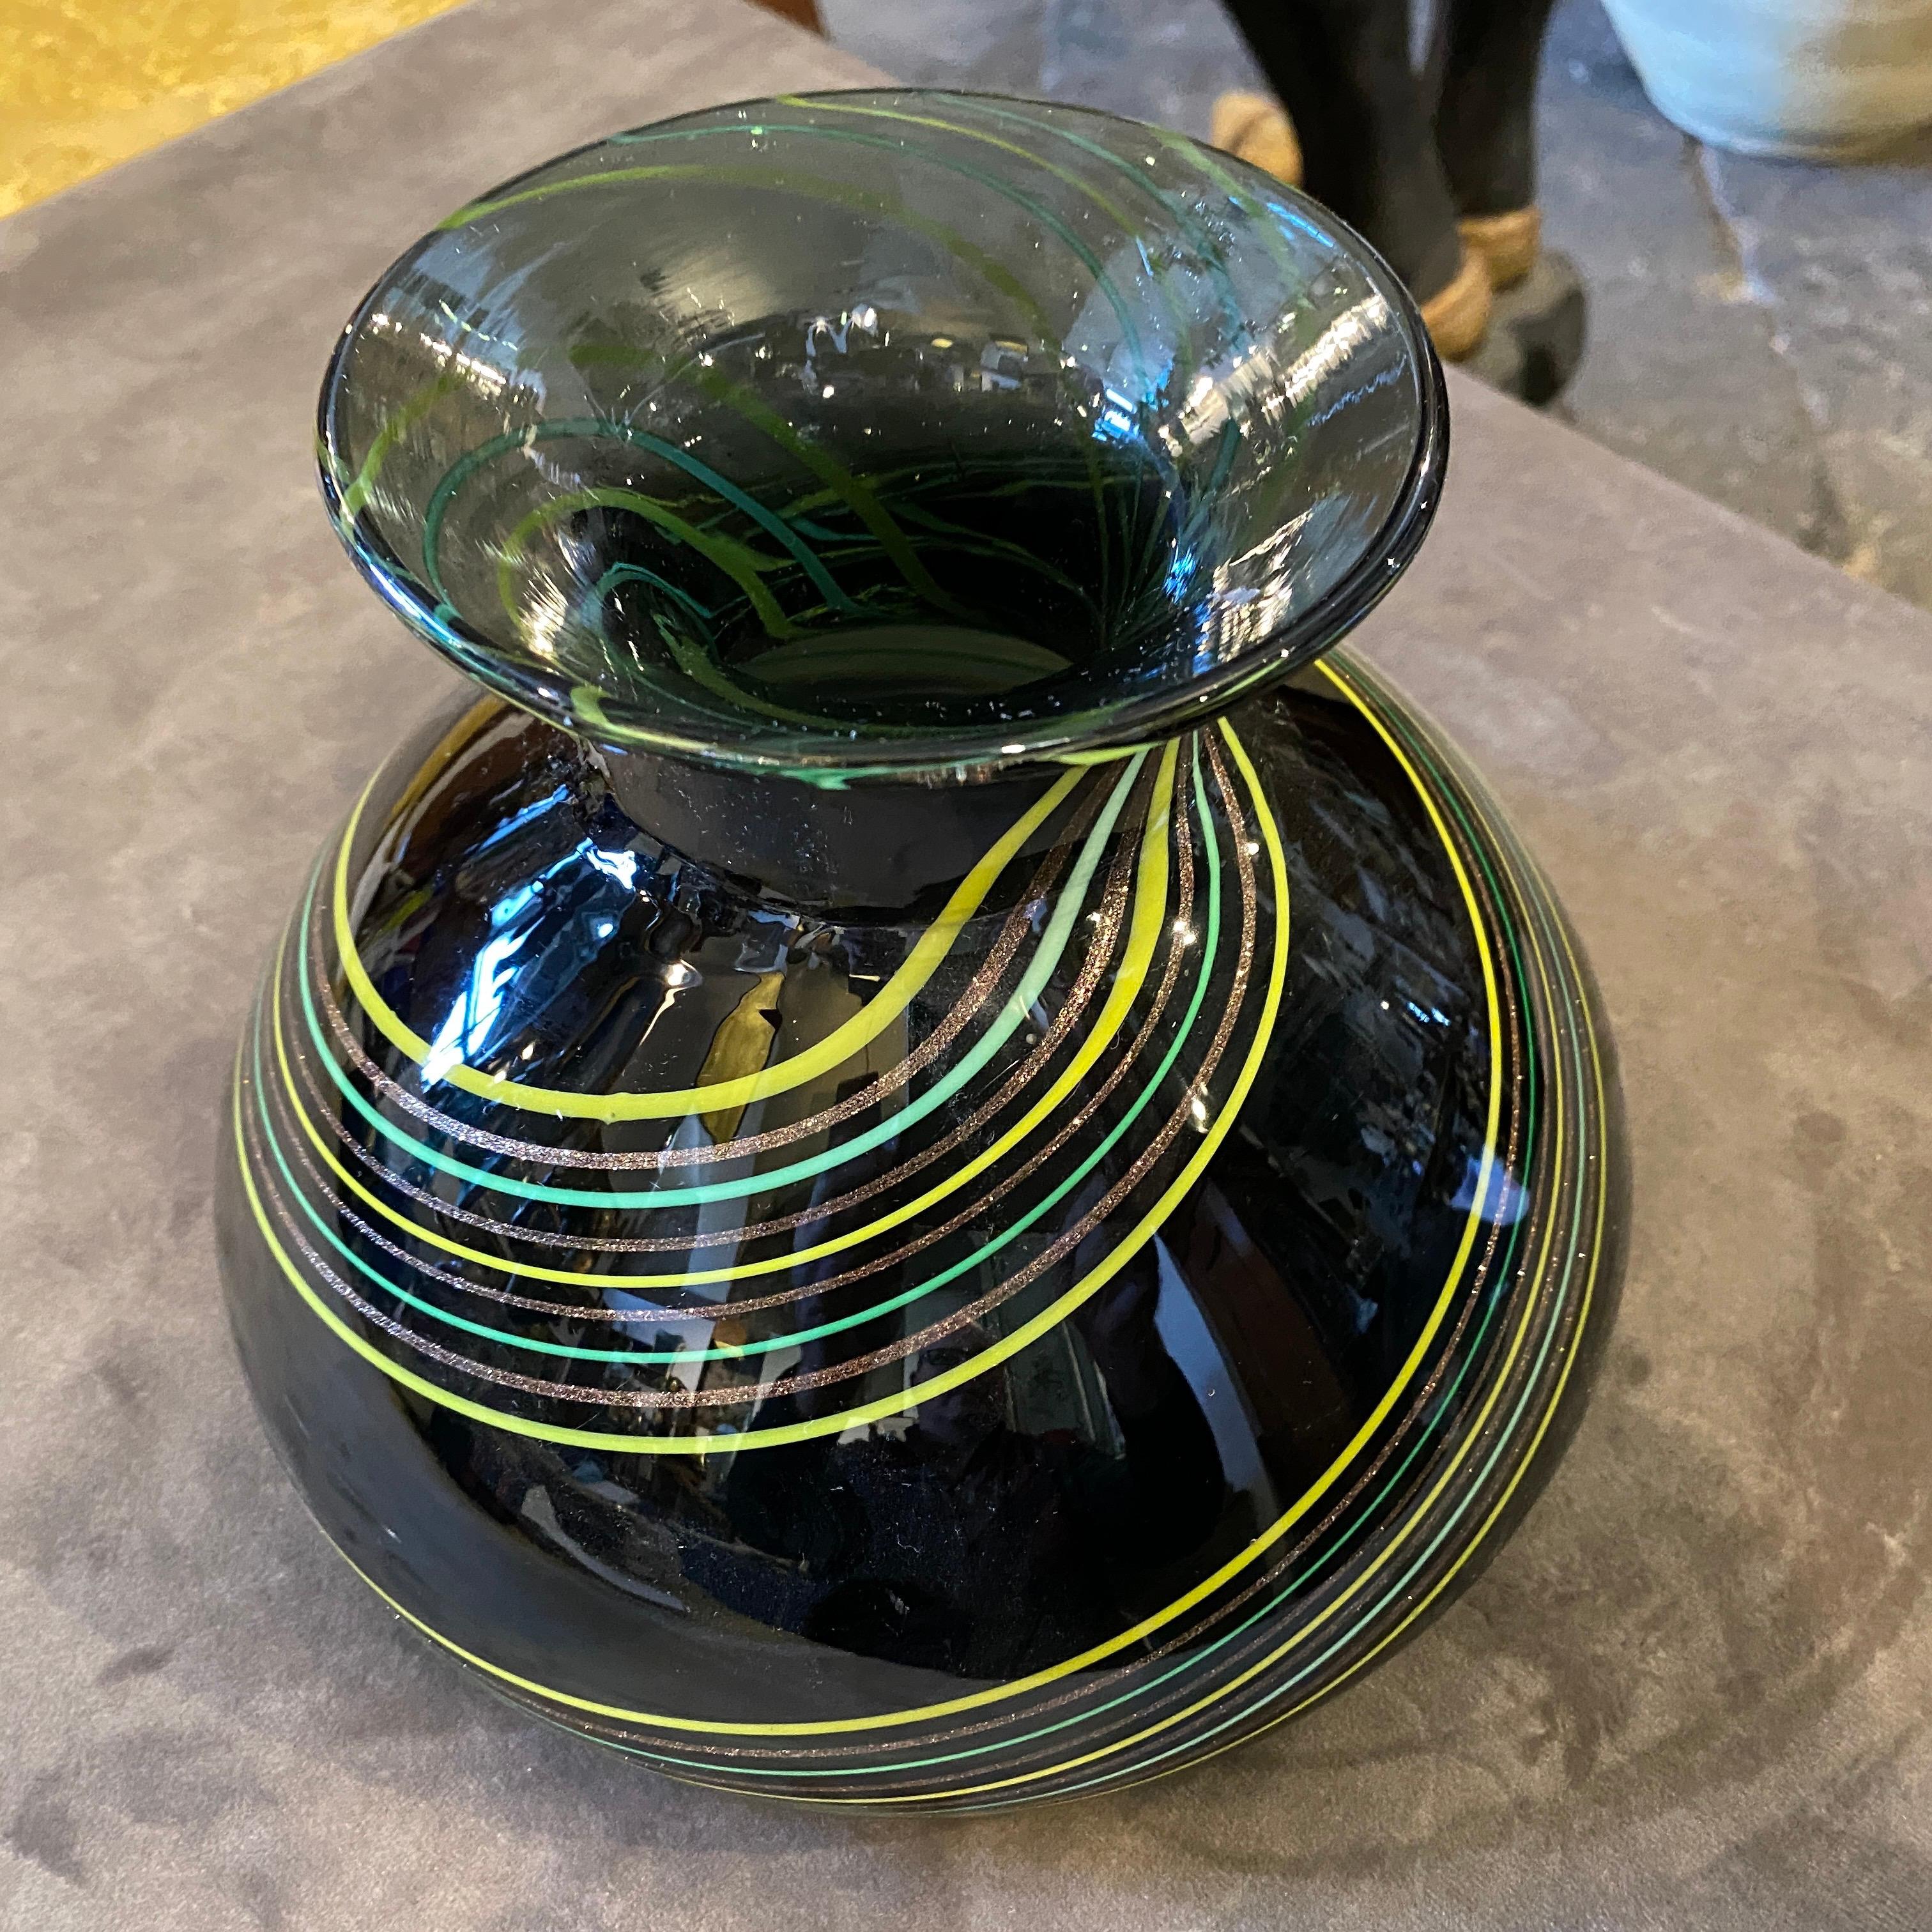 Italian 1980s Modernist Black Green and Yellow Striped Murano Glass Vase For Sale